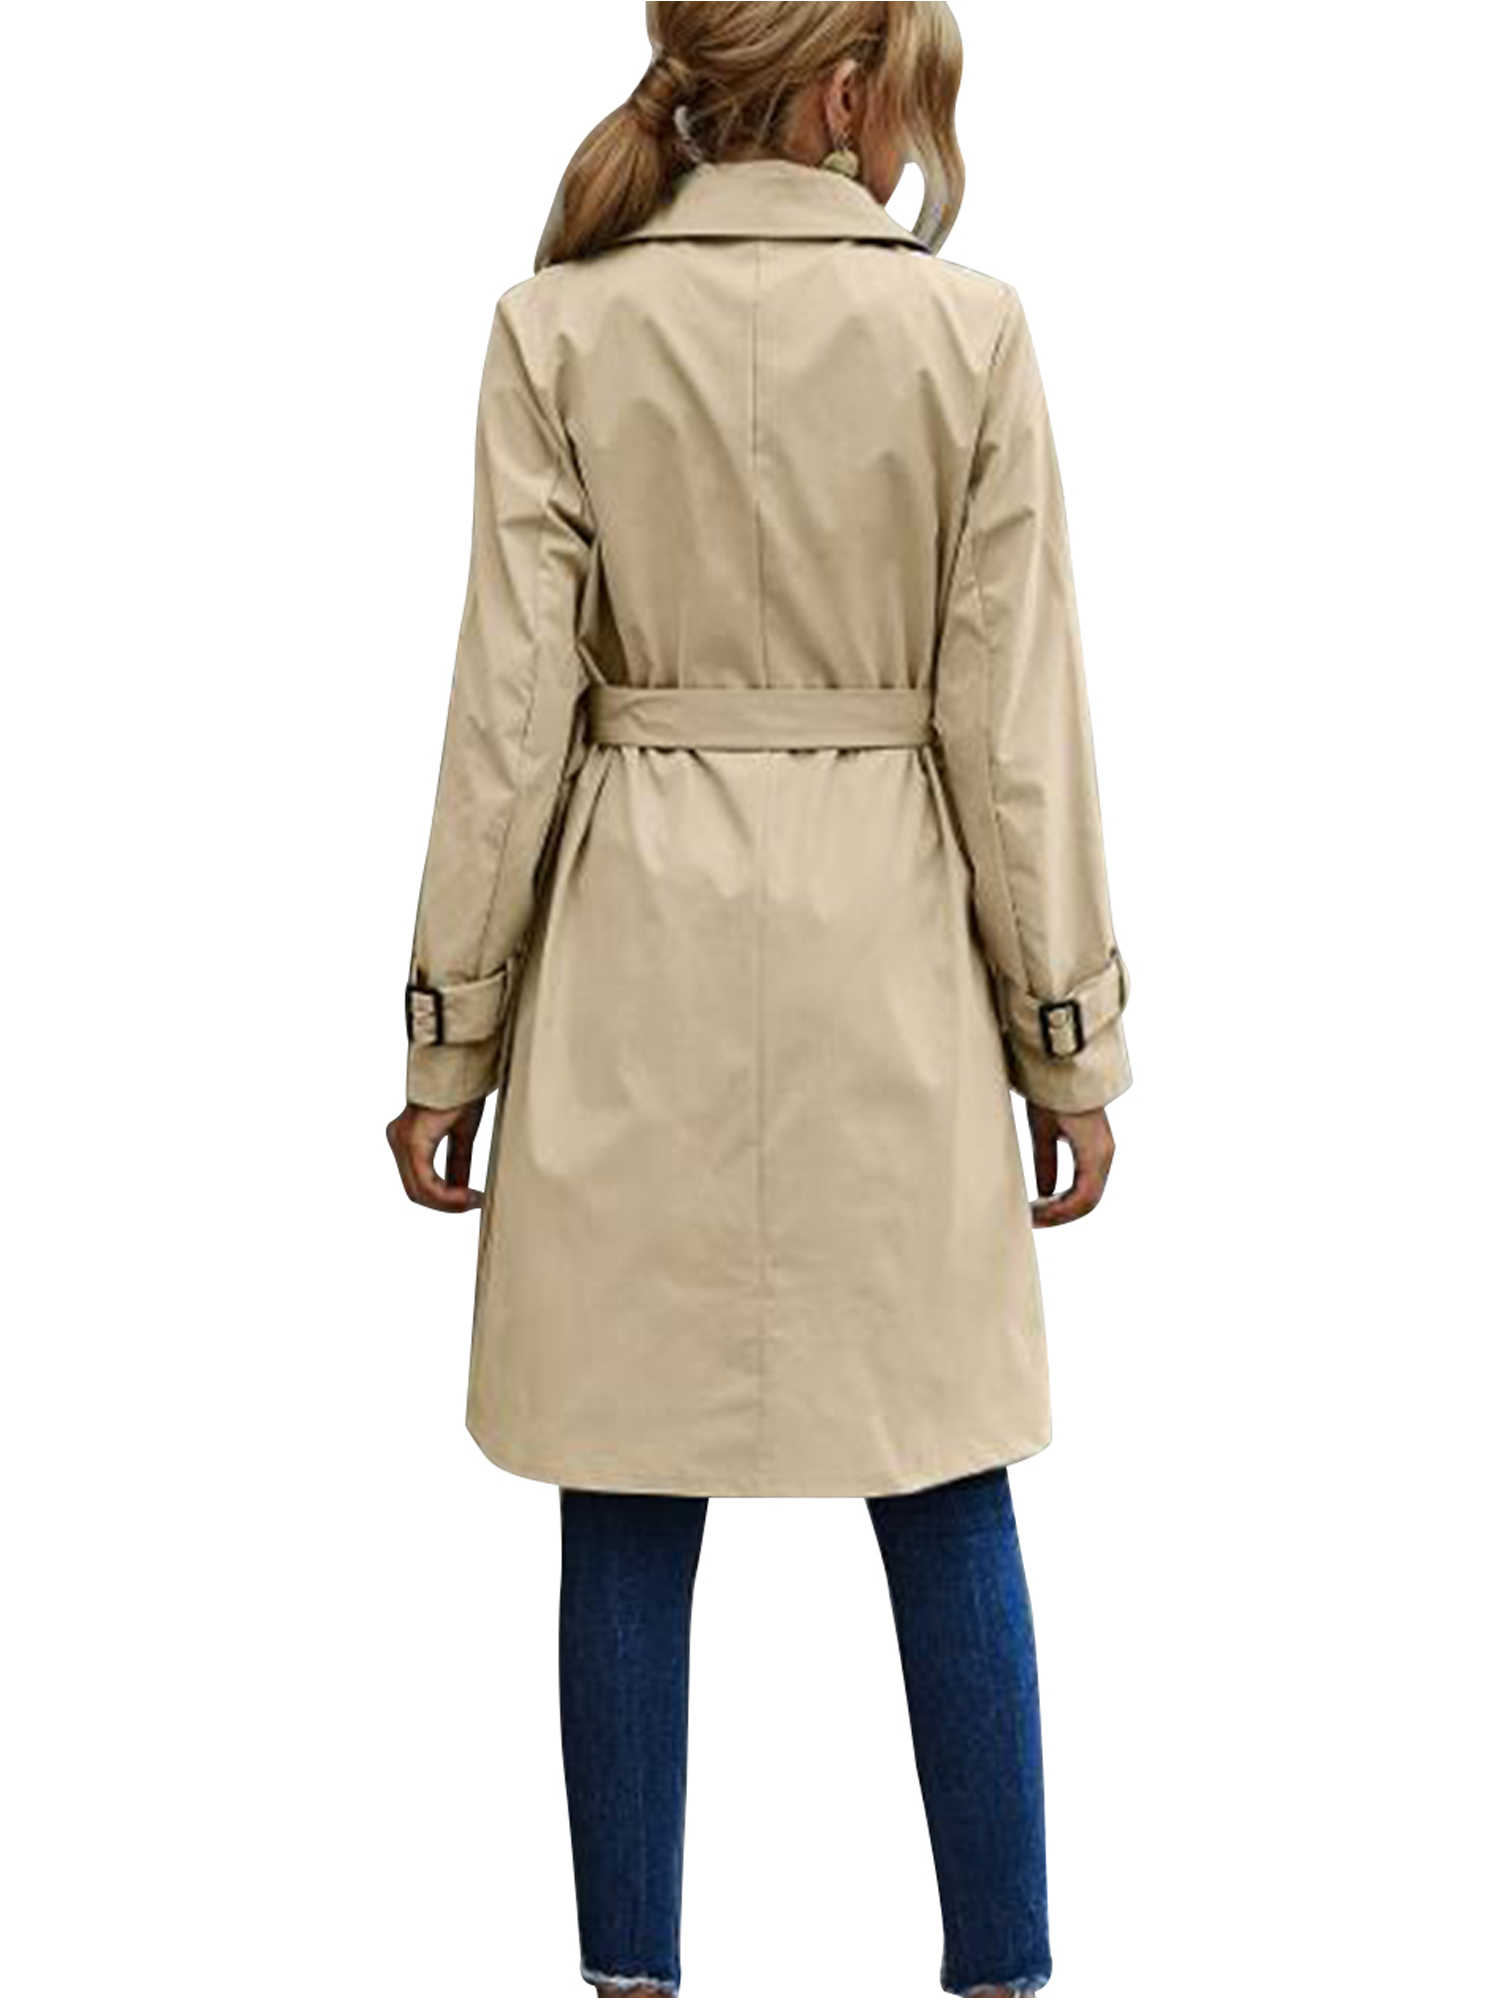 Spring hue Women Jacket Long Sleeve Lapel Double Breasted Belted Trench Coat - image 3 of 5